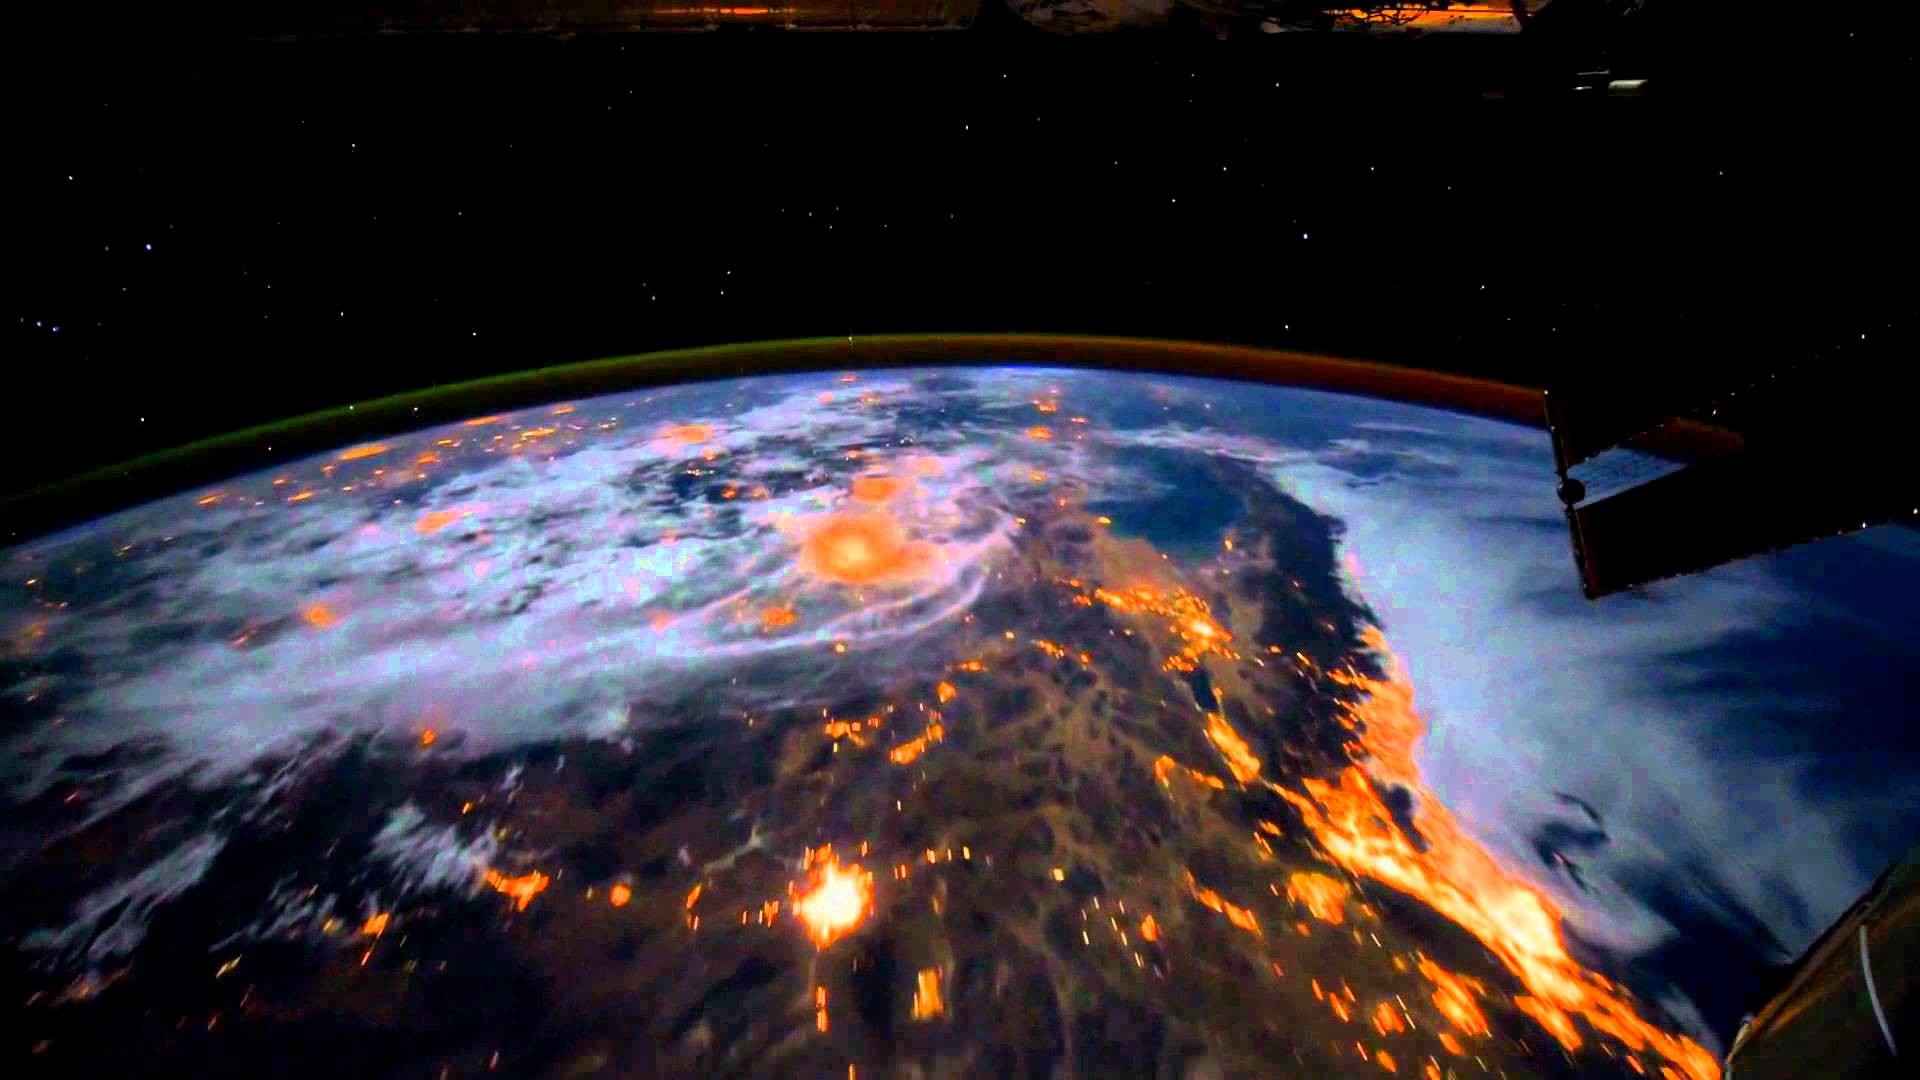 1920x1080 [Dreamscene] Animated Wallpaper - Earth View from the ISS - YouTube